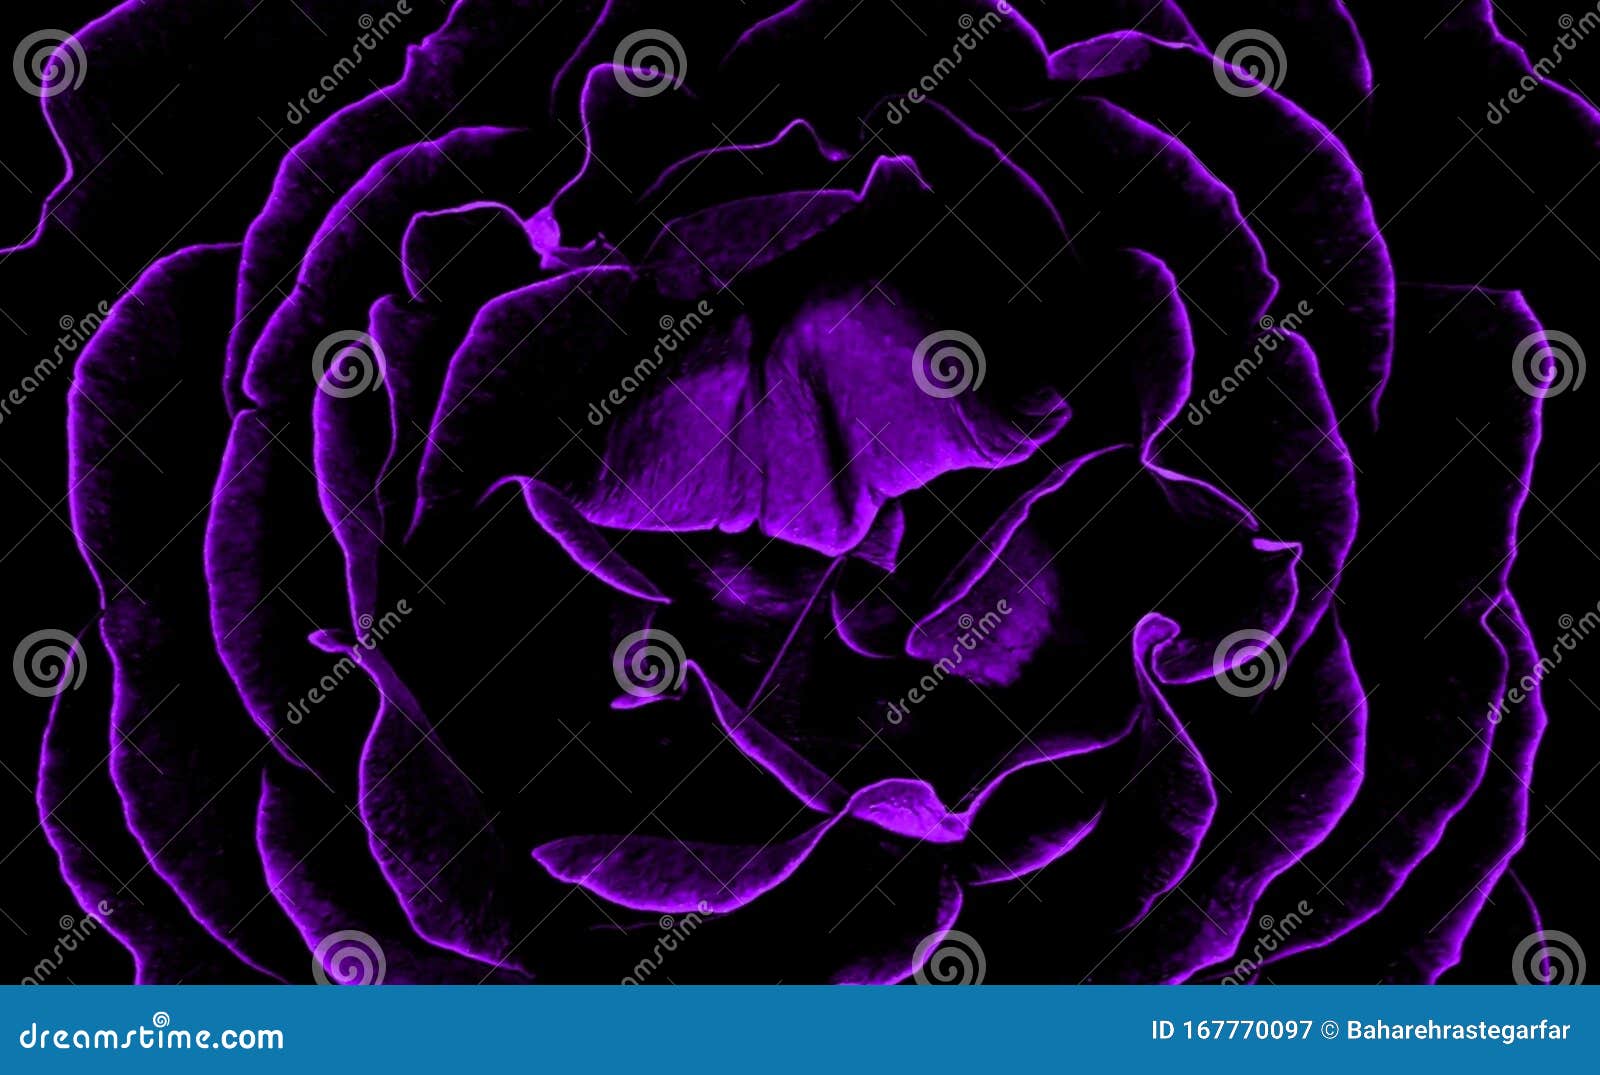 Black and Purple Rose Background Stock Image - Image of closeup